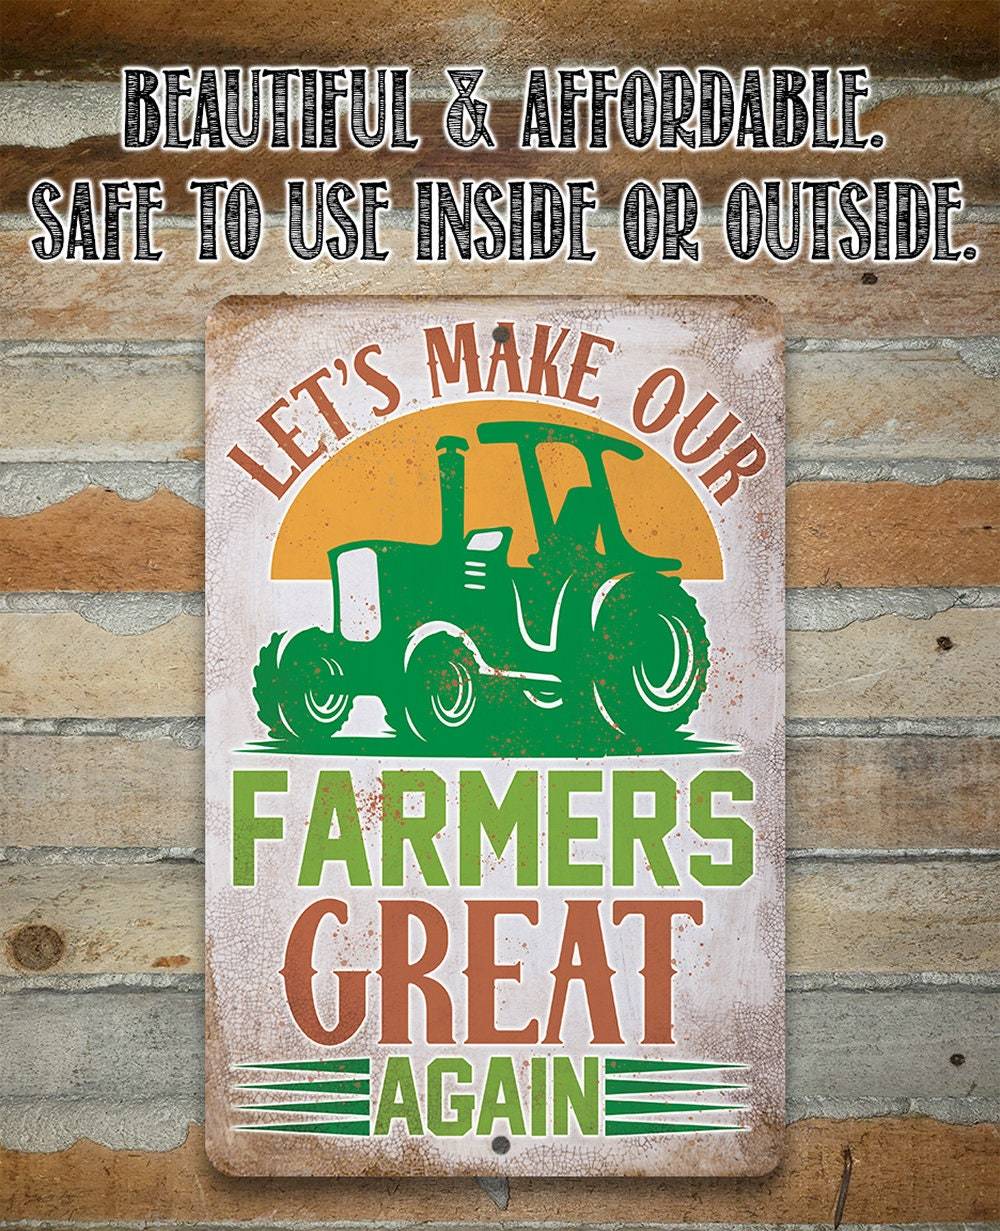 Let's Make Our Farmers Great Again - Metal Sign | Lone Star Art.